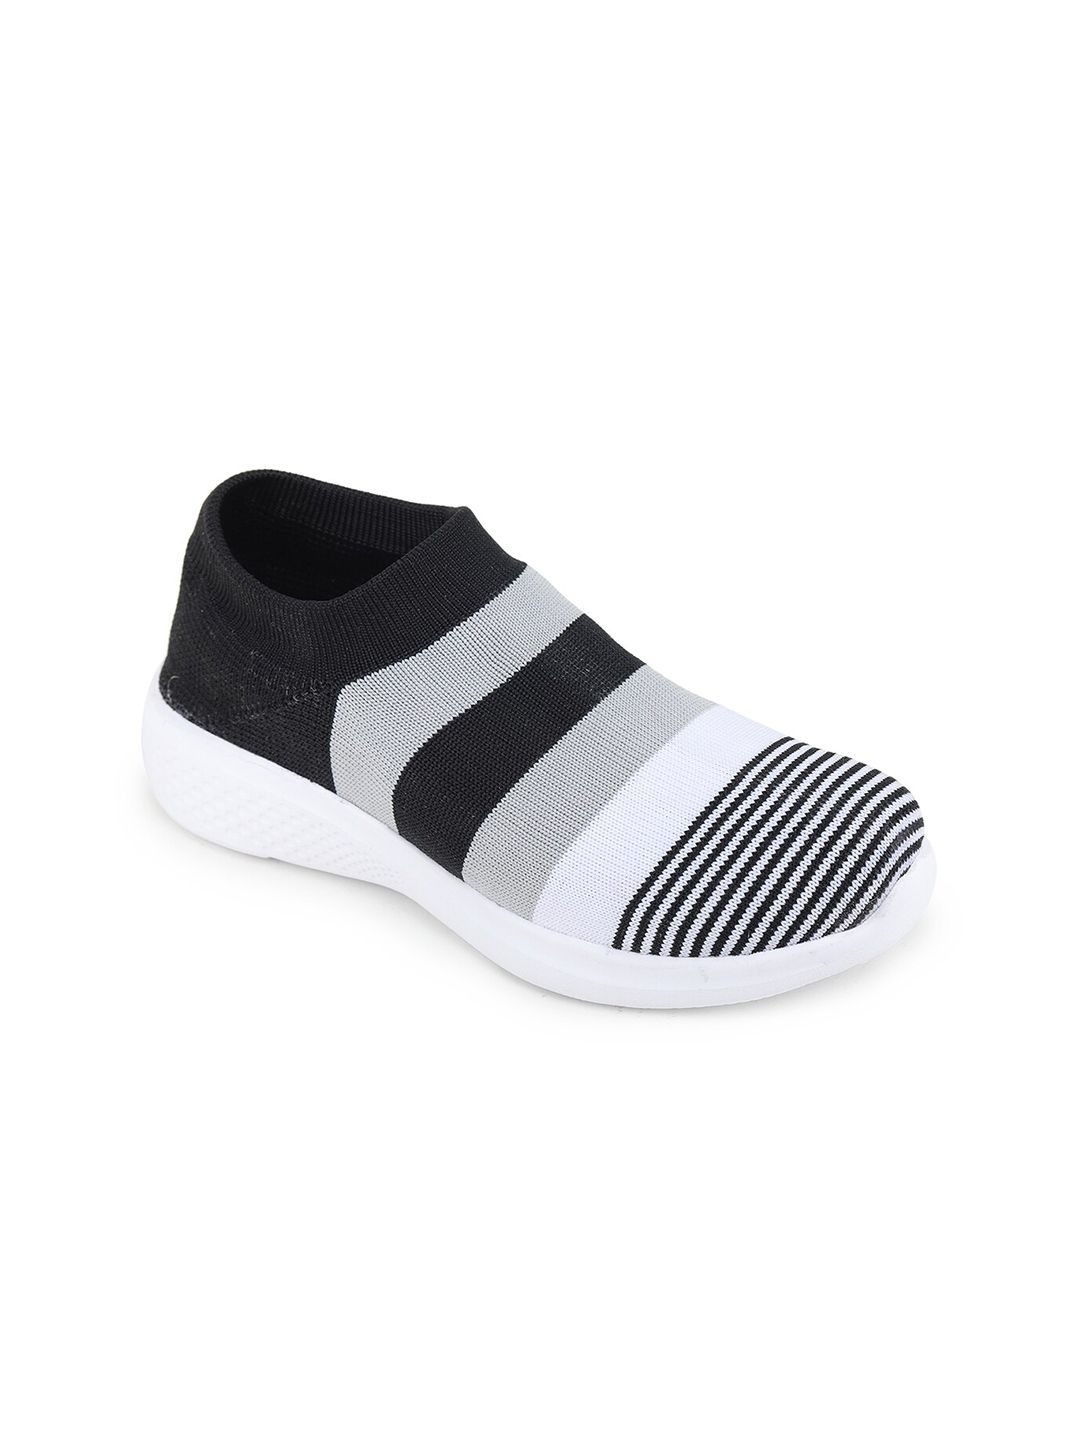 TRASE Women Black Textile Running Shoes Price in India